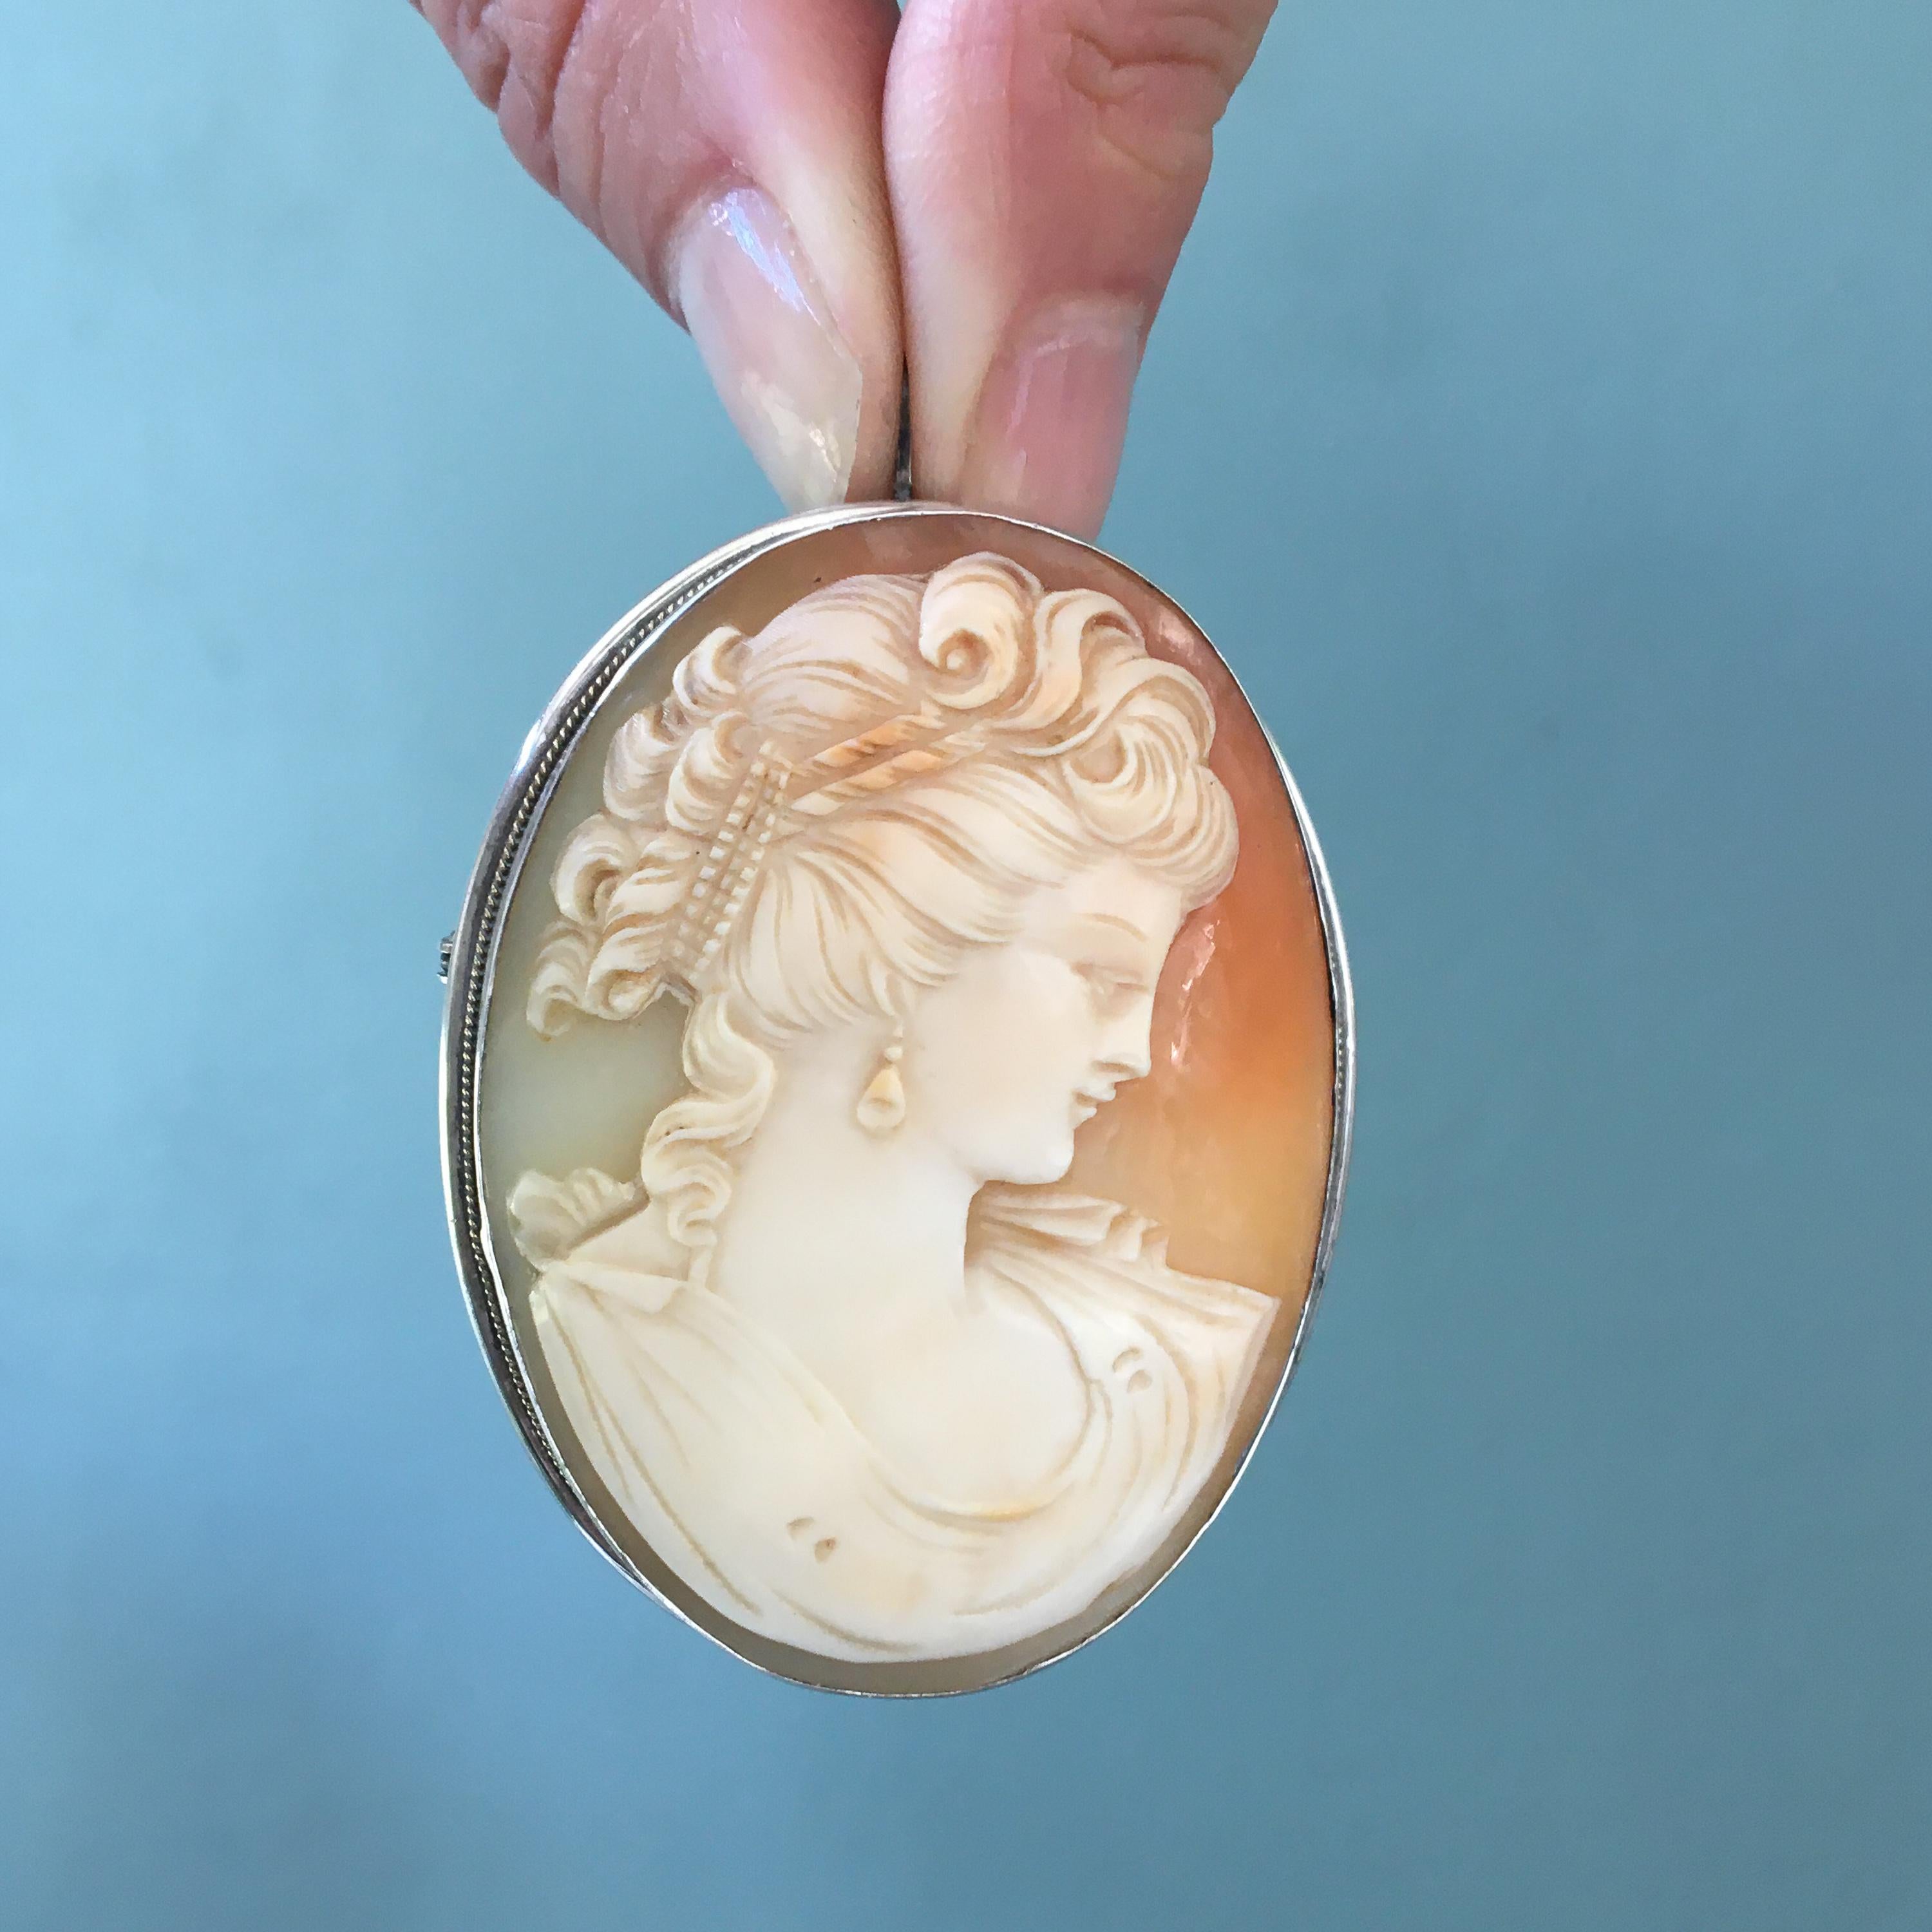 A large shell cameo brooch set in a silver frame. The cameo is very detailed into a carved female silhouette. The woman radiates beauty. Her curly hair is beautifully detailed with a ribbon in her hair and wearing drop earrings. The carved shell is